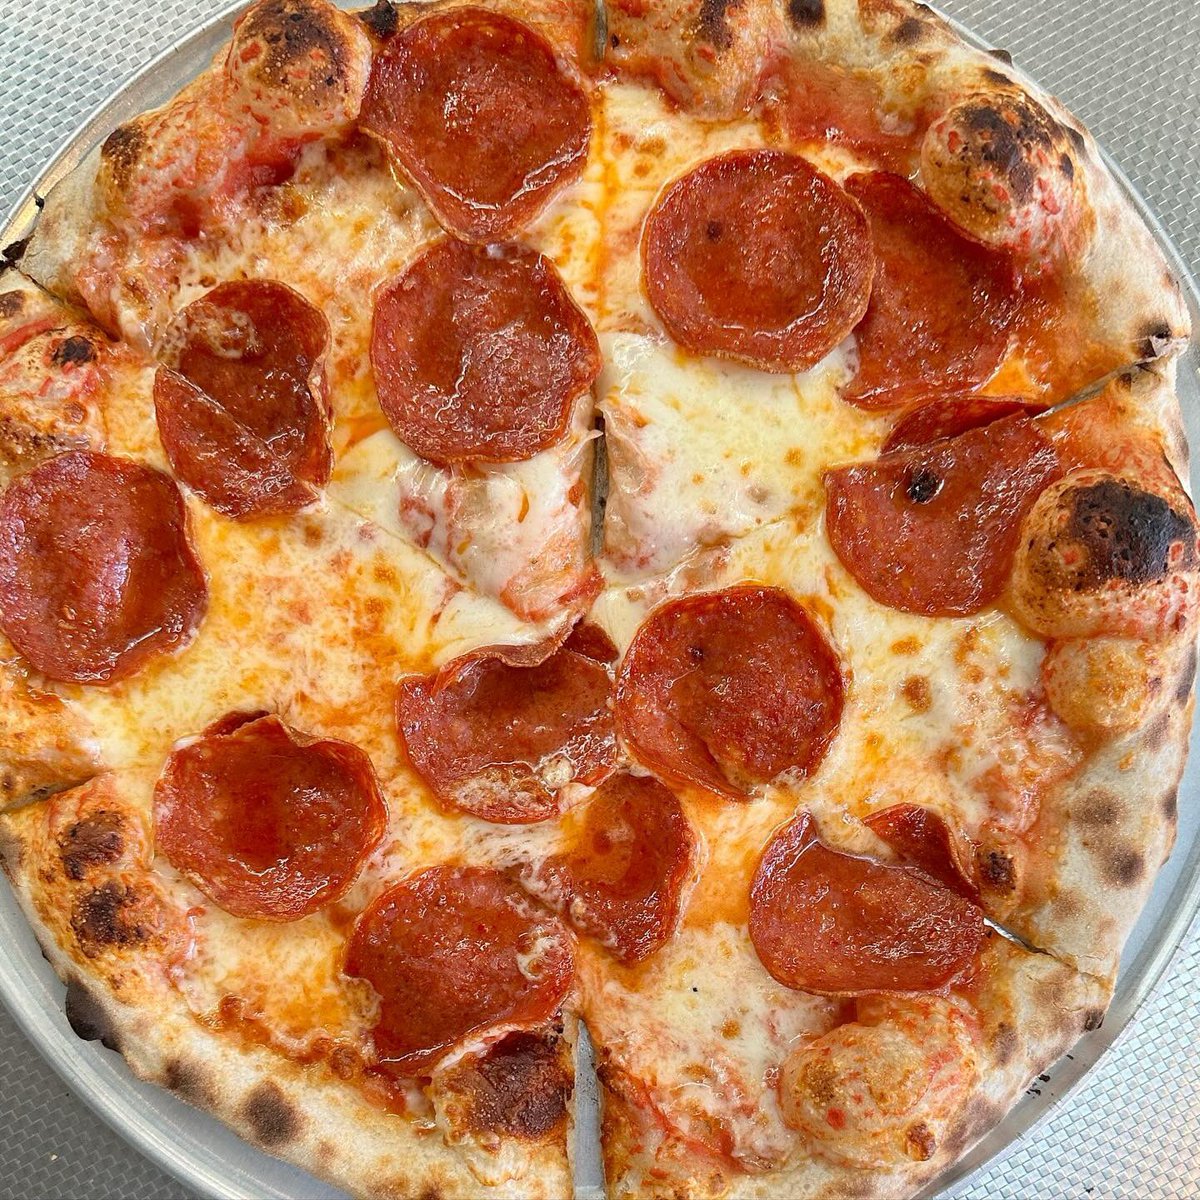 RP #LiveFirePizza #napa 
Crust us, you’ll want to savor the flavor of our double zero #pizza dough. We offer pizza to go with door dash, or through our website for pickup. Order your pizza half-baked and finish it in your oven. Lots of options for all #pizzalovers
@LiveFireOxbow